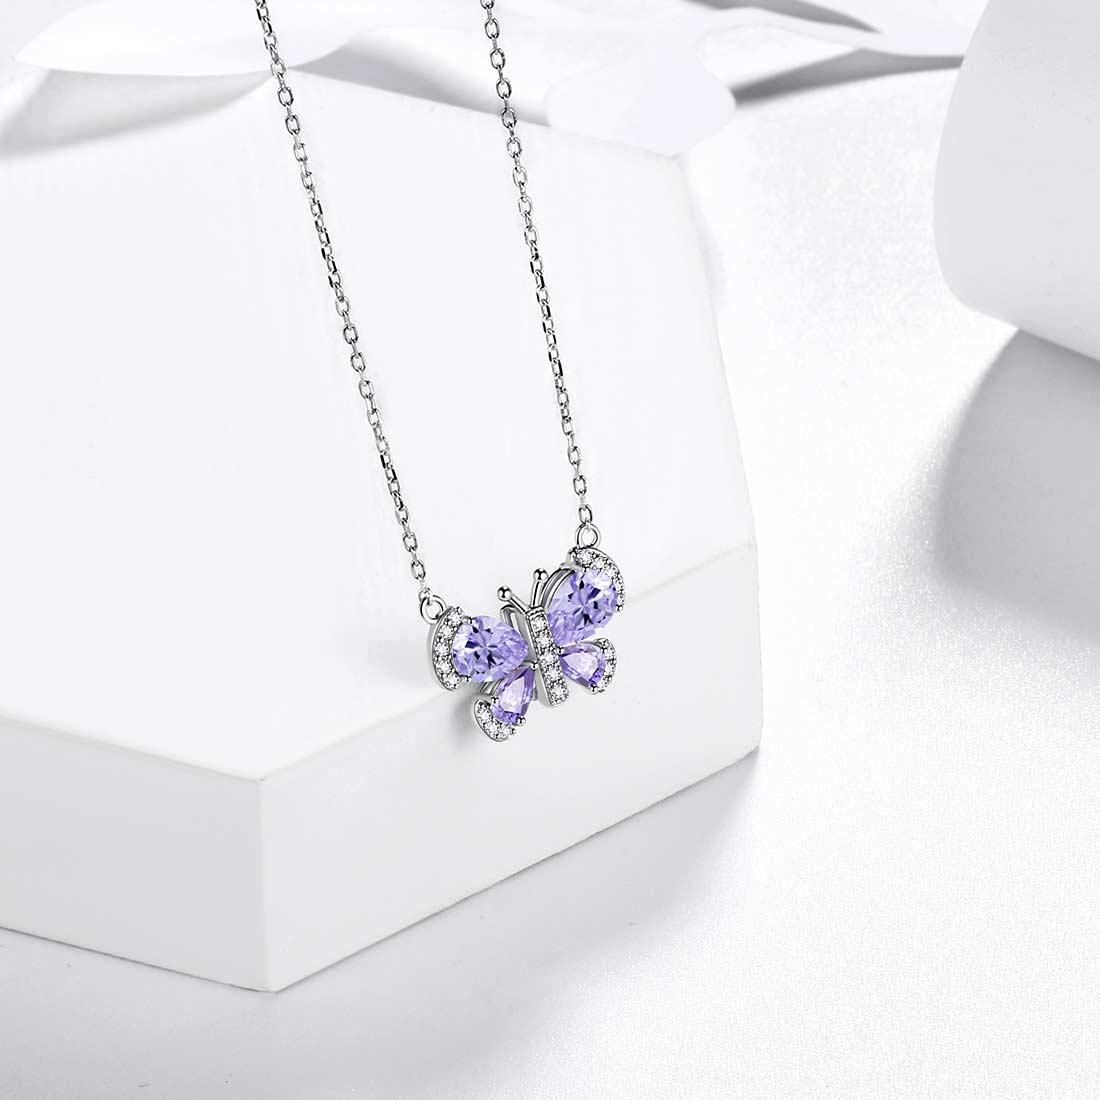 Butterfly Necklace Birthstone June Alexandrite Pendant - Necklaces - Aurora Tears